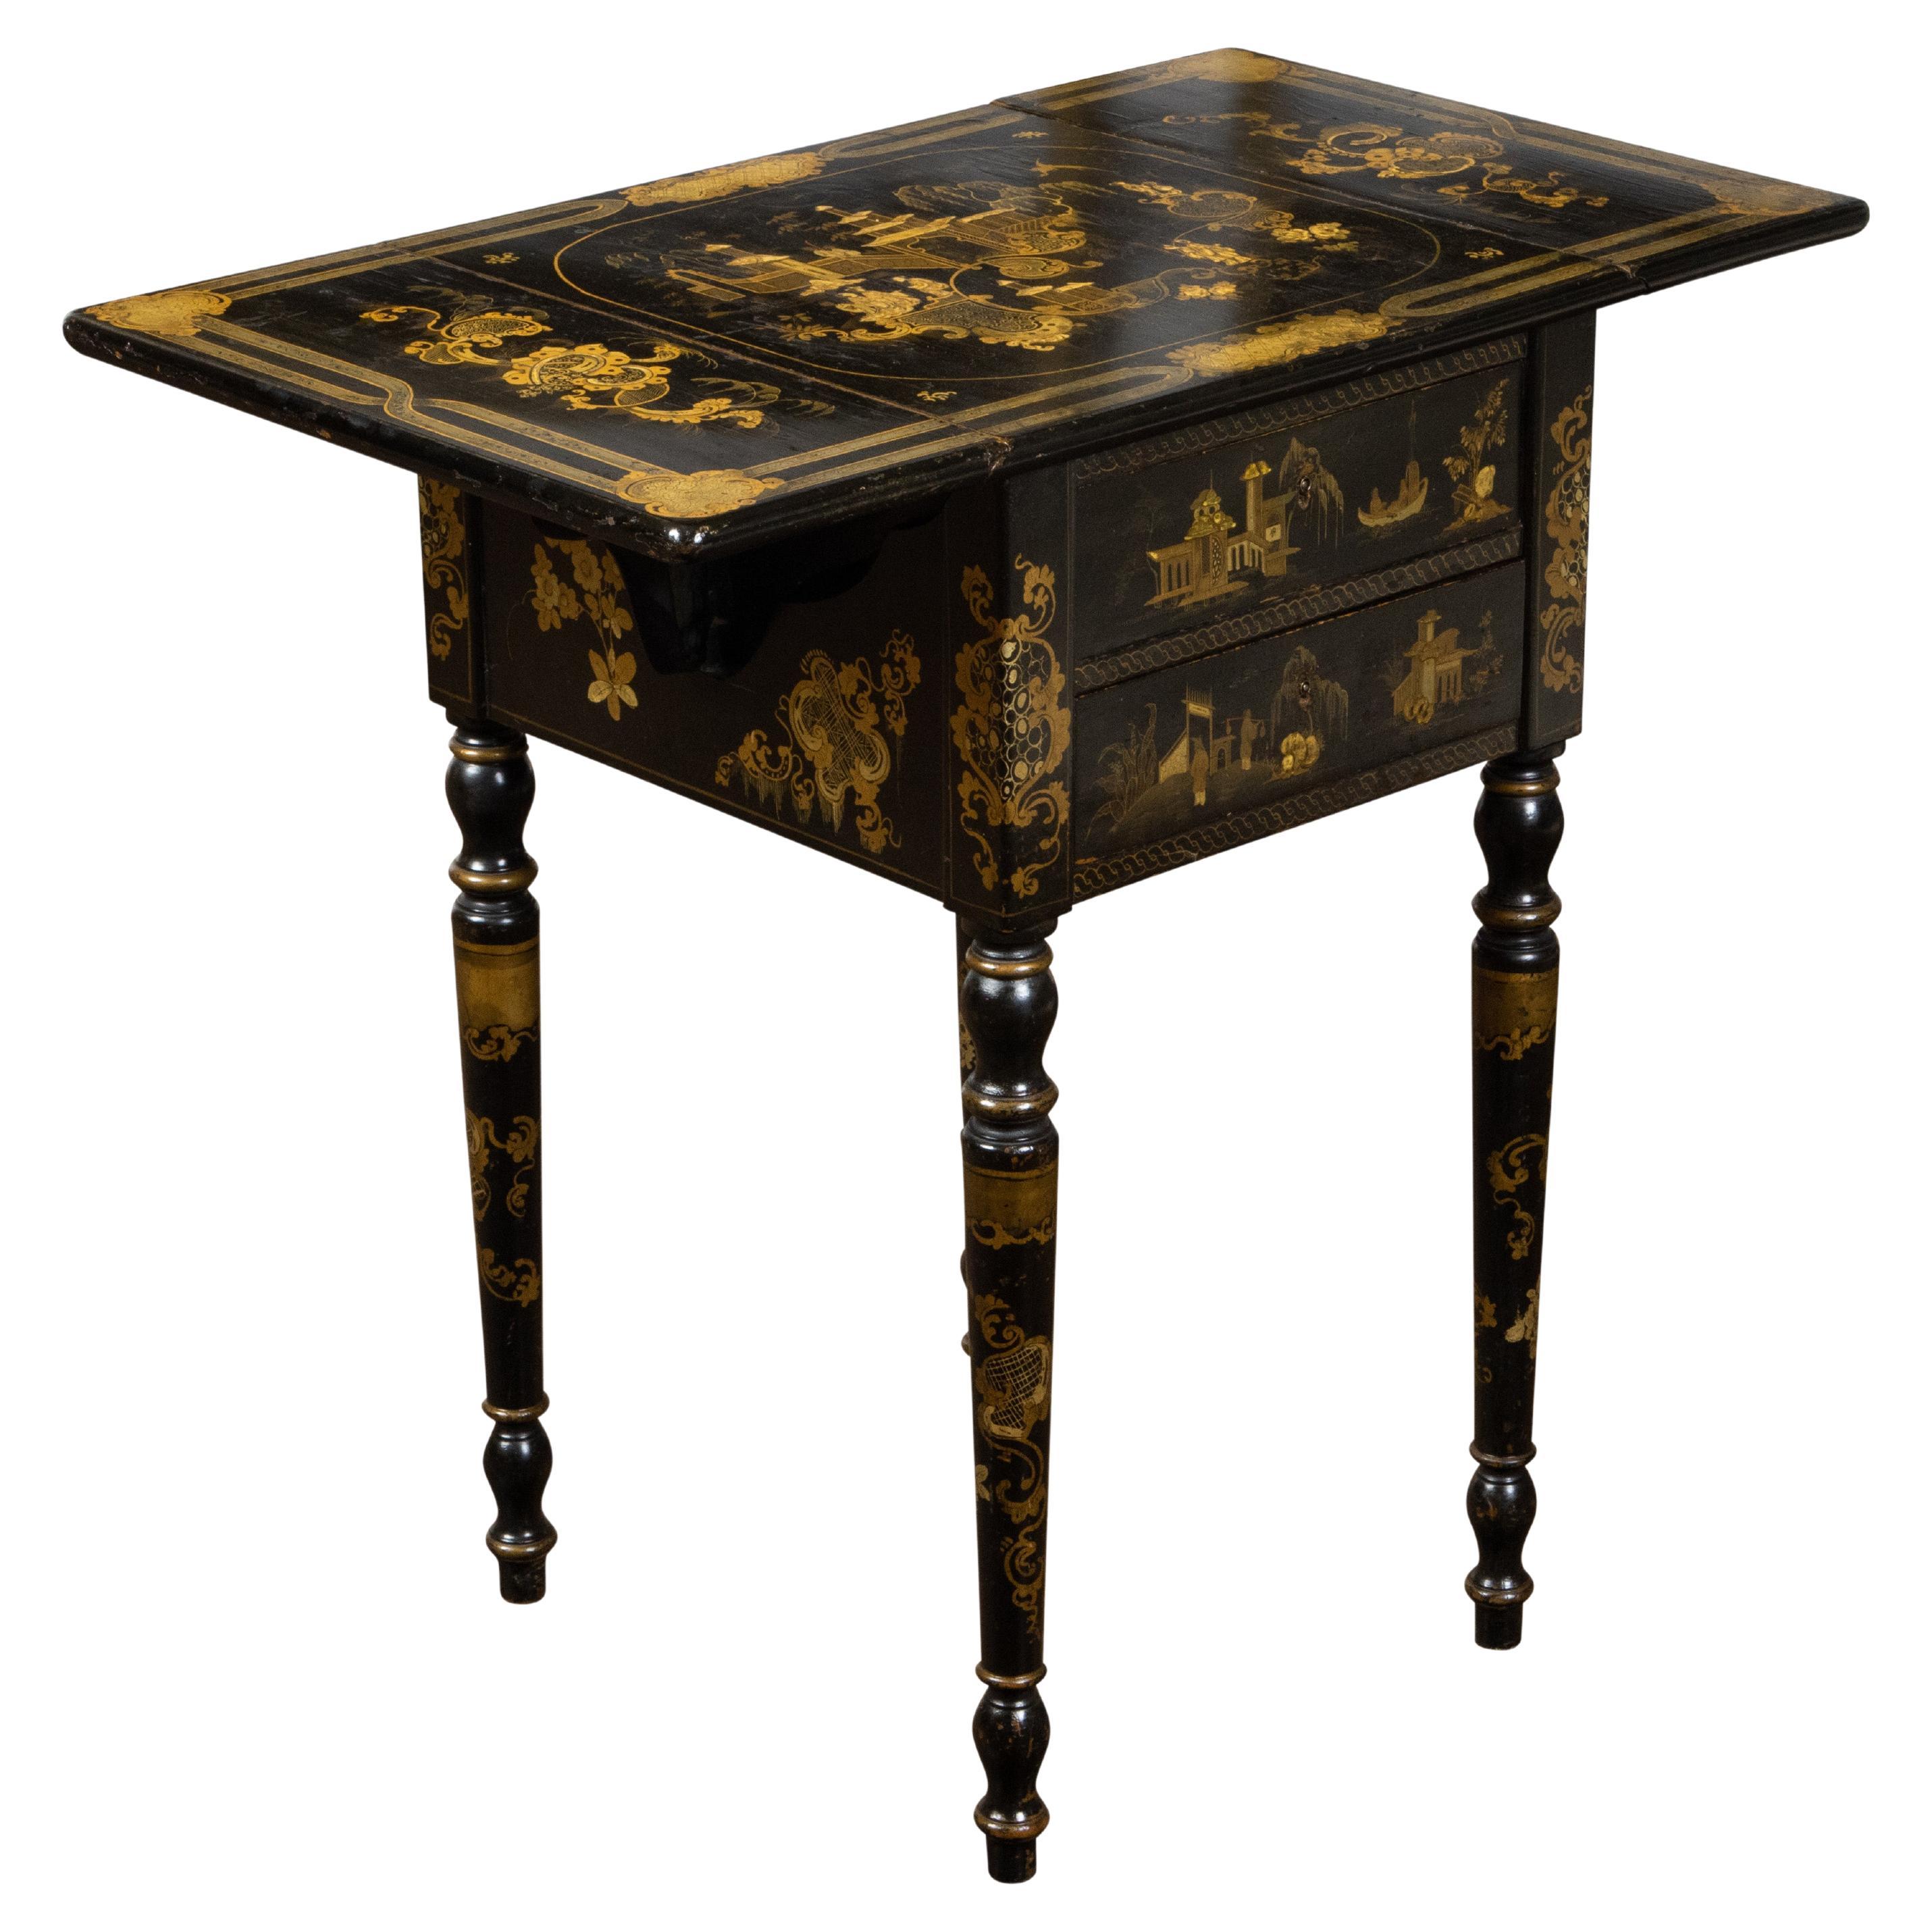 An English black and gold Pembroke side table from the 19th century, with Chinoiserie décor and drop leaves. Created in England during the 19th century, this table features a rectangular top with two drop leaves, sitting above an elegant apron.